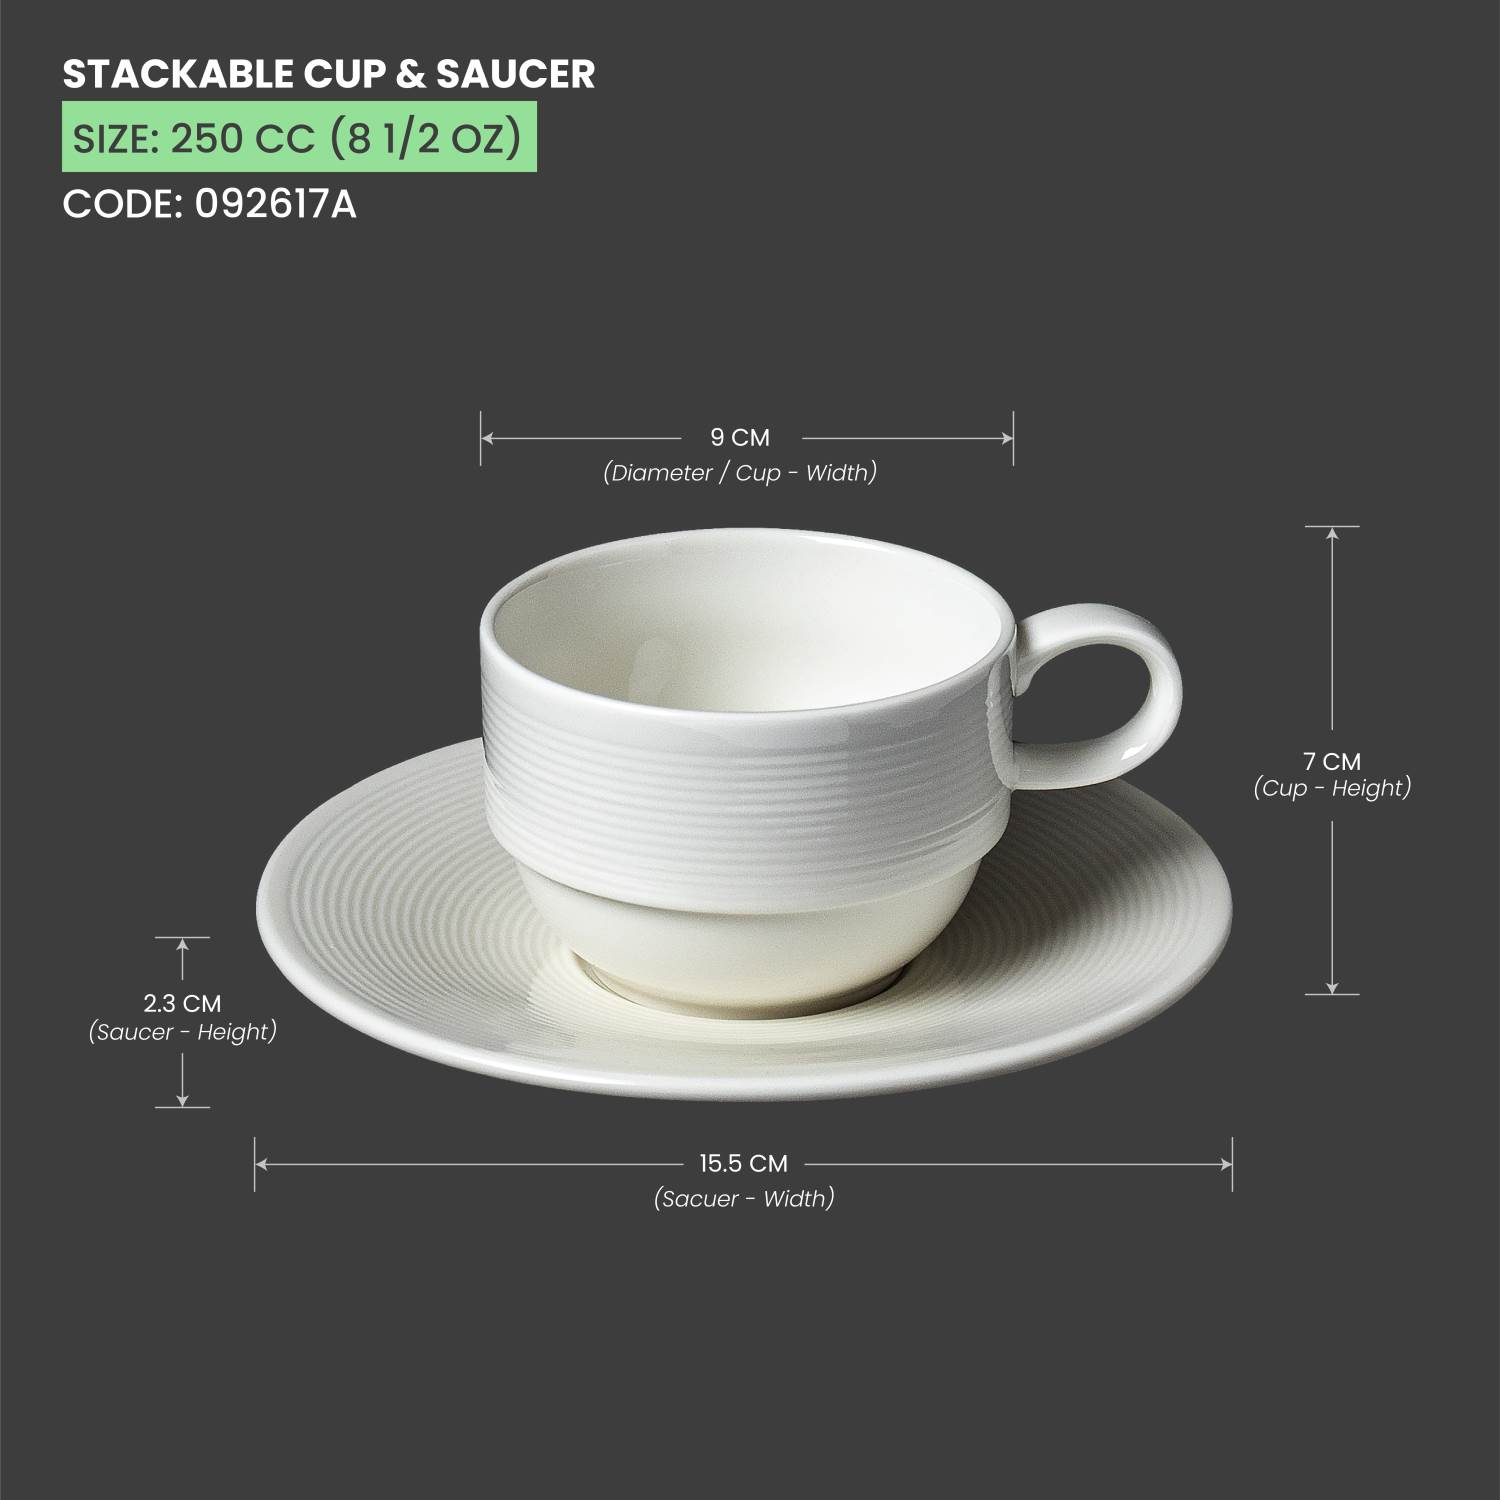 Baralee Wish Stackable Cup 250 Cc (8 1/2 Oz)